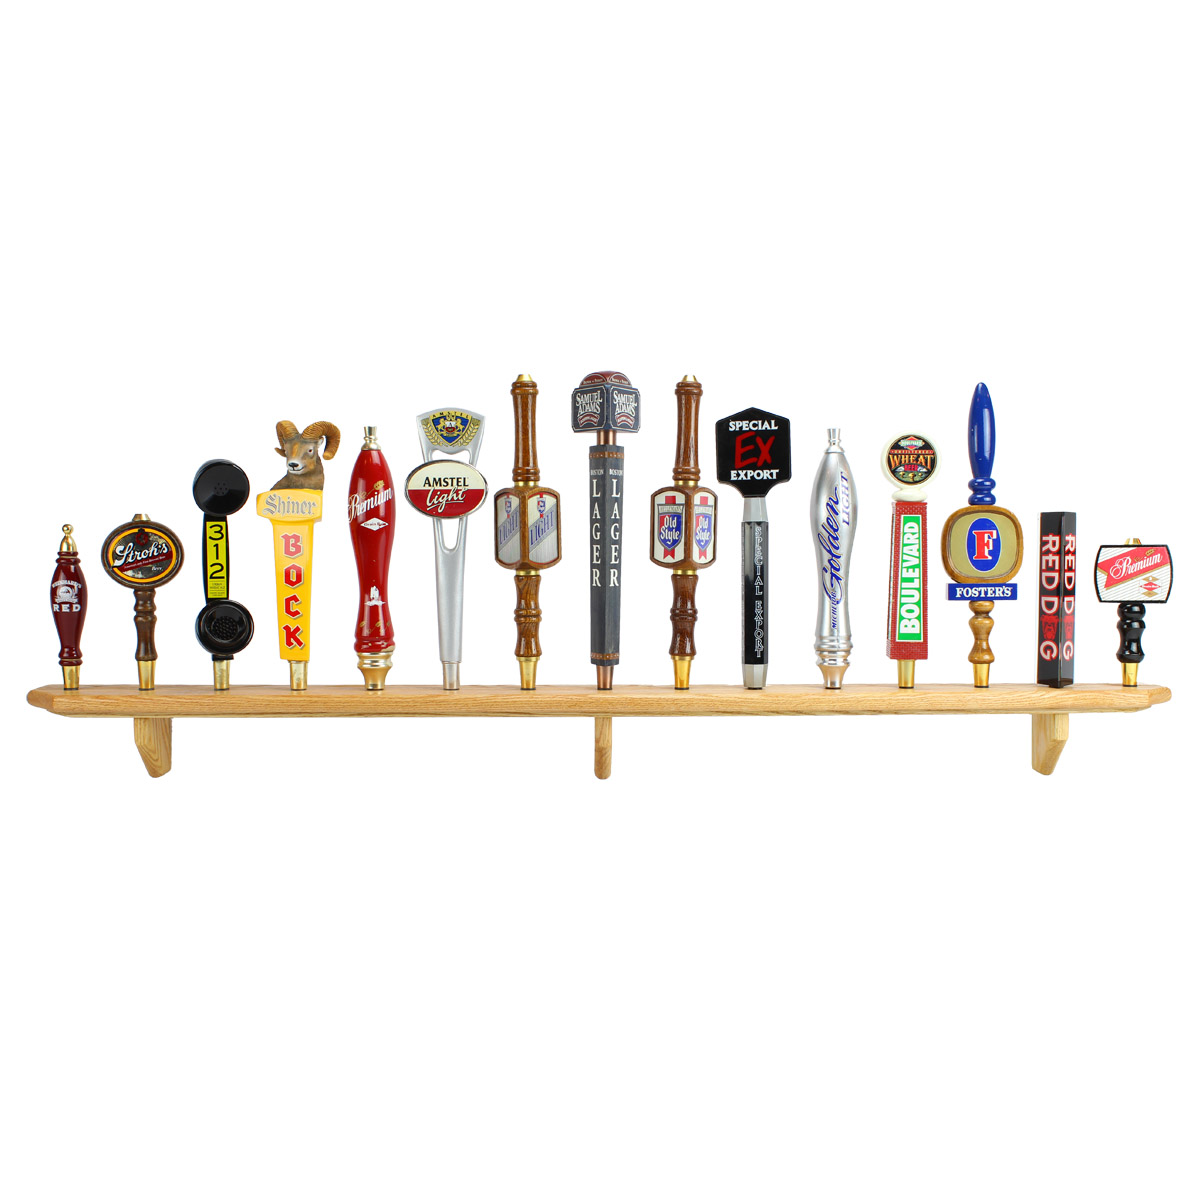 Details about   OAK BEER TAP HANDLE DISPLAY BASE HOLDS 27 AT ALMOST 3' LONG ON  3 TIERS 